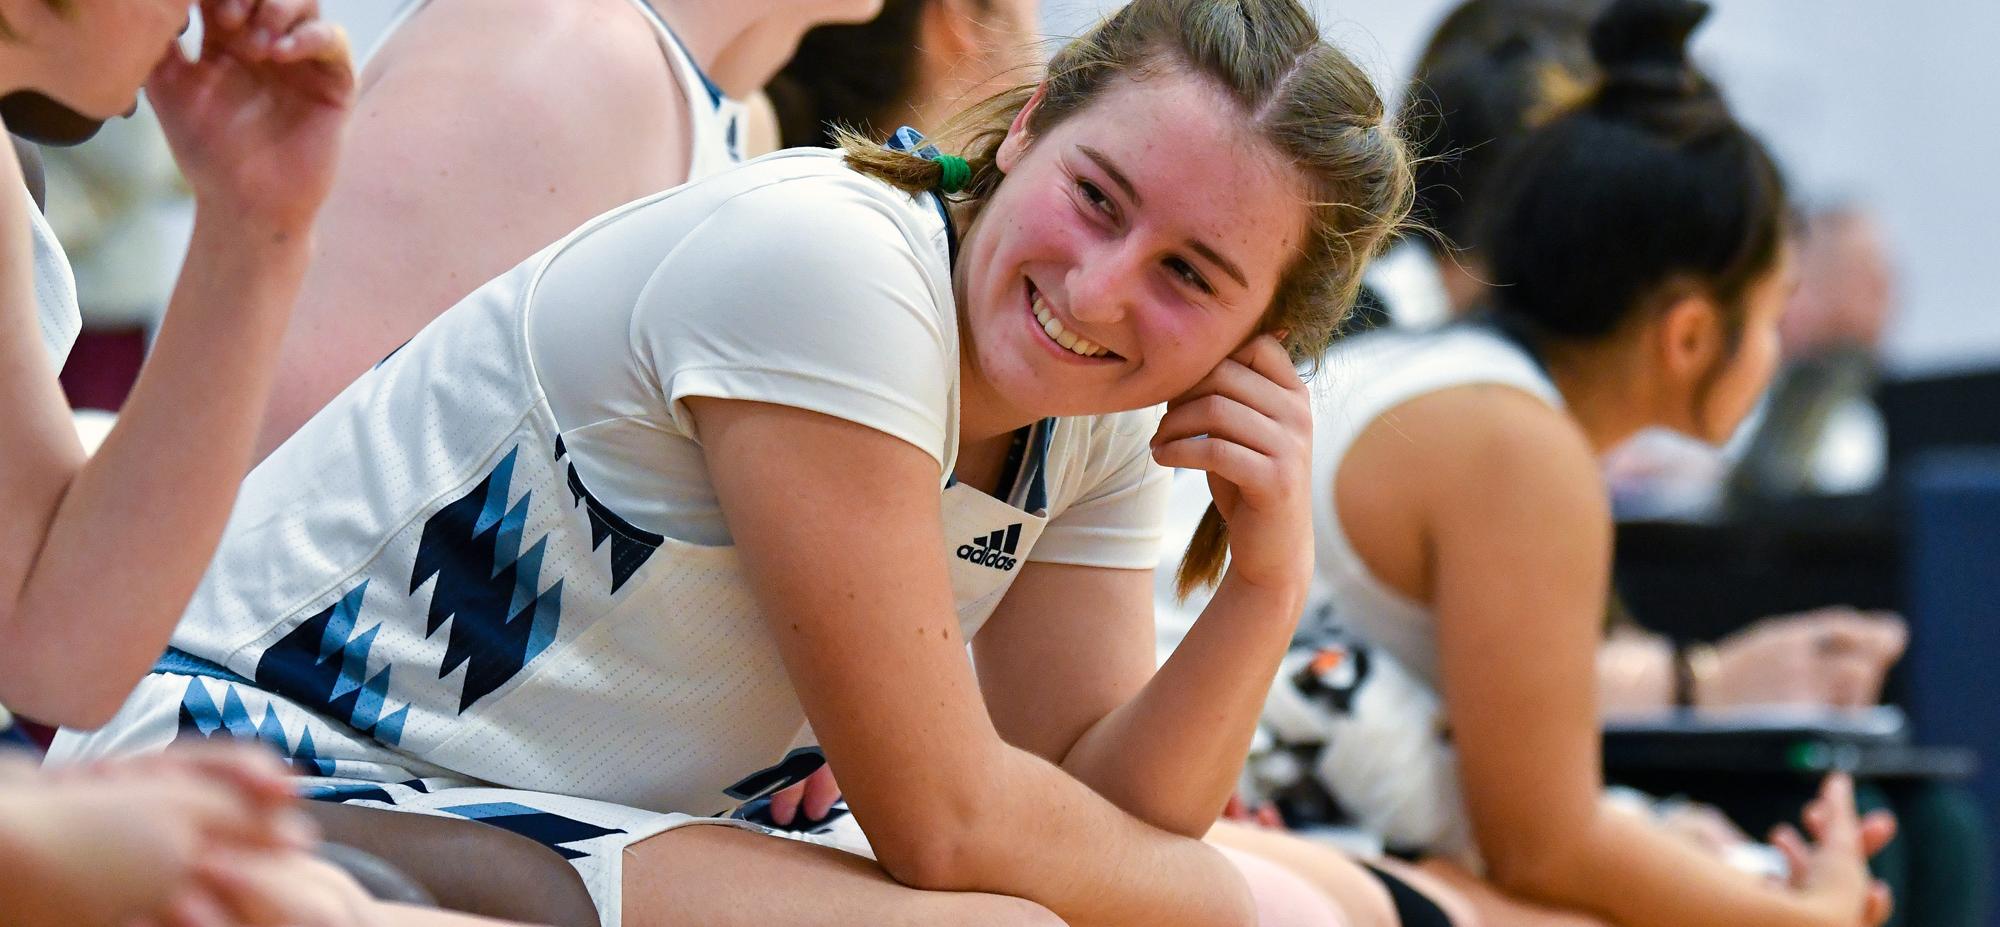 Kendall Maurer poured in a season-high 21 points to lead Mount Holyoke to a 62-55 win over Bard College on Jan. 11, 2023. (RJB Sports file photo)